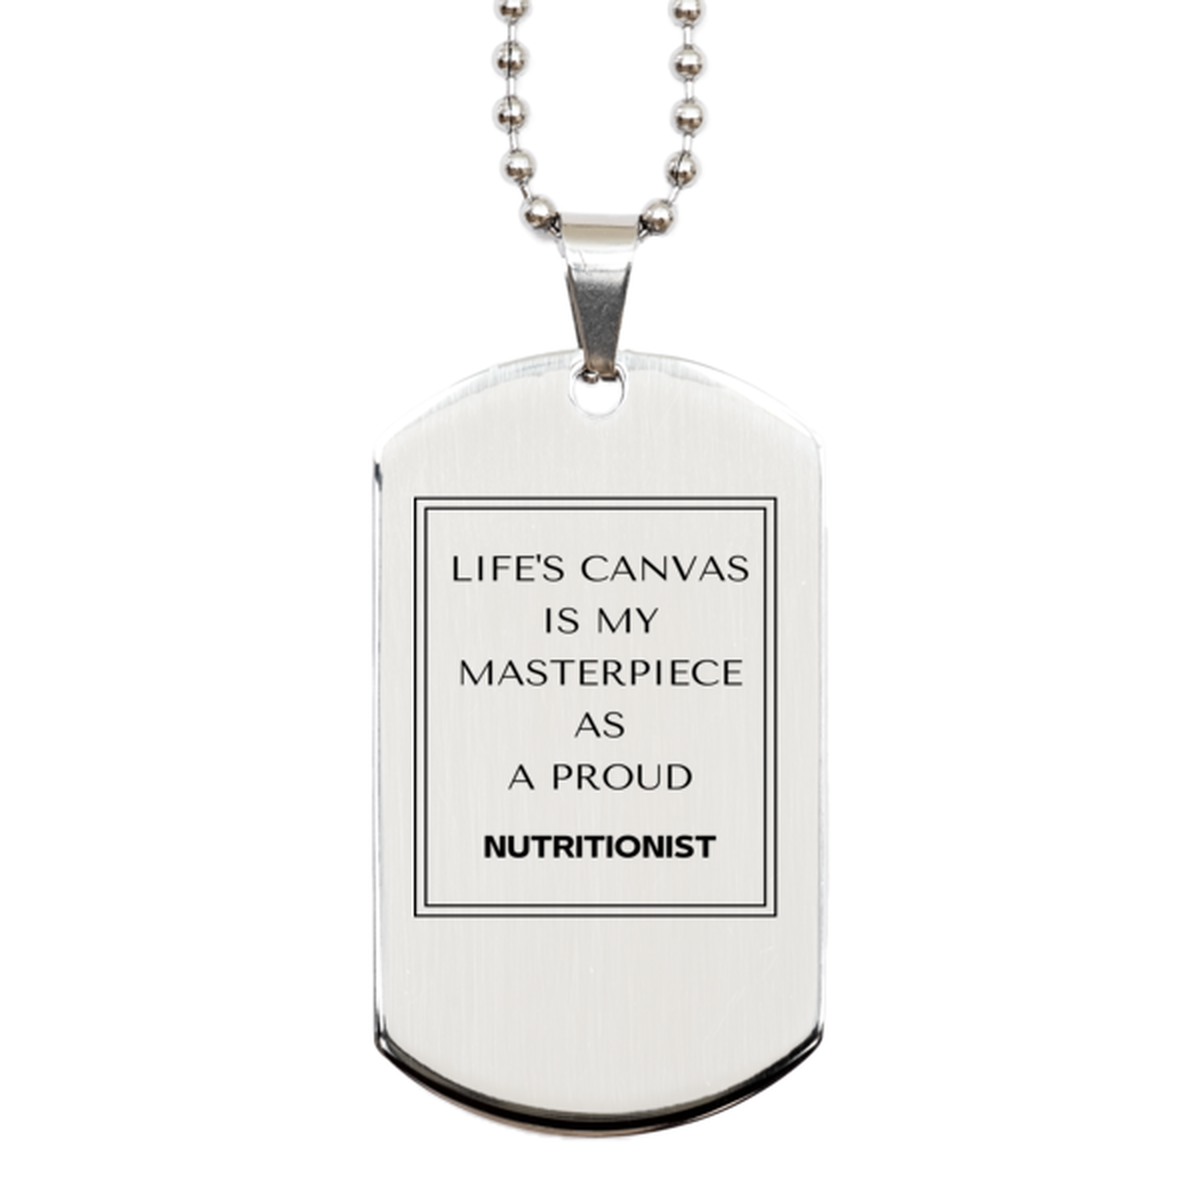 Proud Nutritionist Gifts, Life's canvas is my masterpiece, Epic Birthday Christmas Unique Silver Dog Tag For Nutritionist, Coworkers, Men, Women, Friends